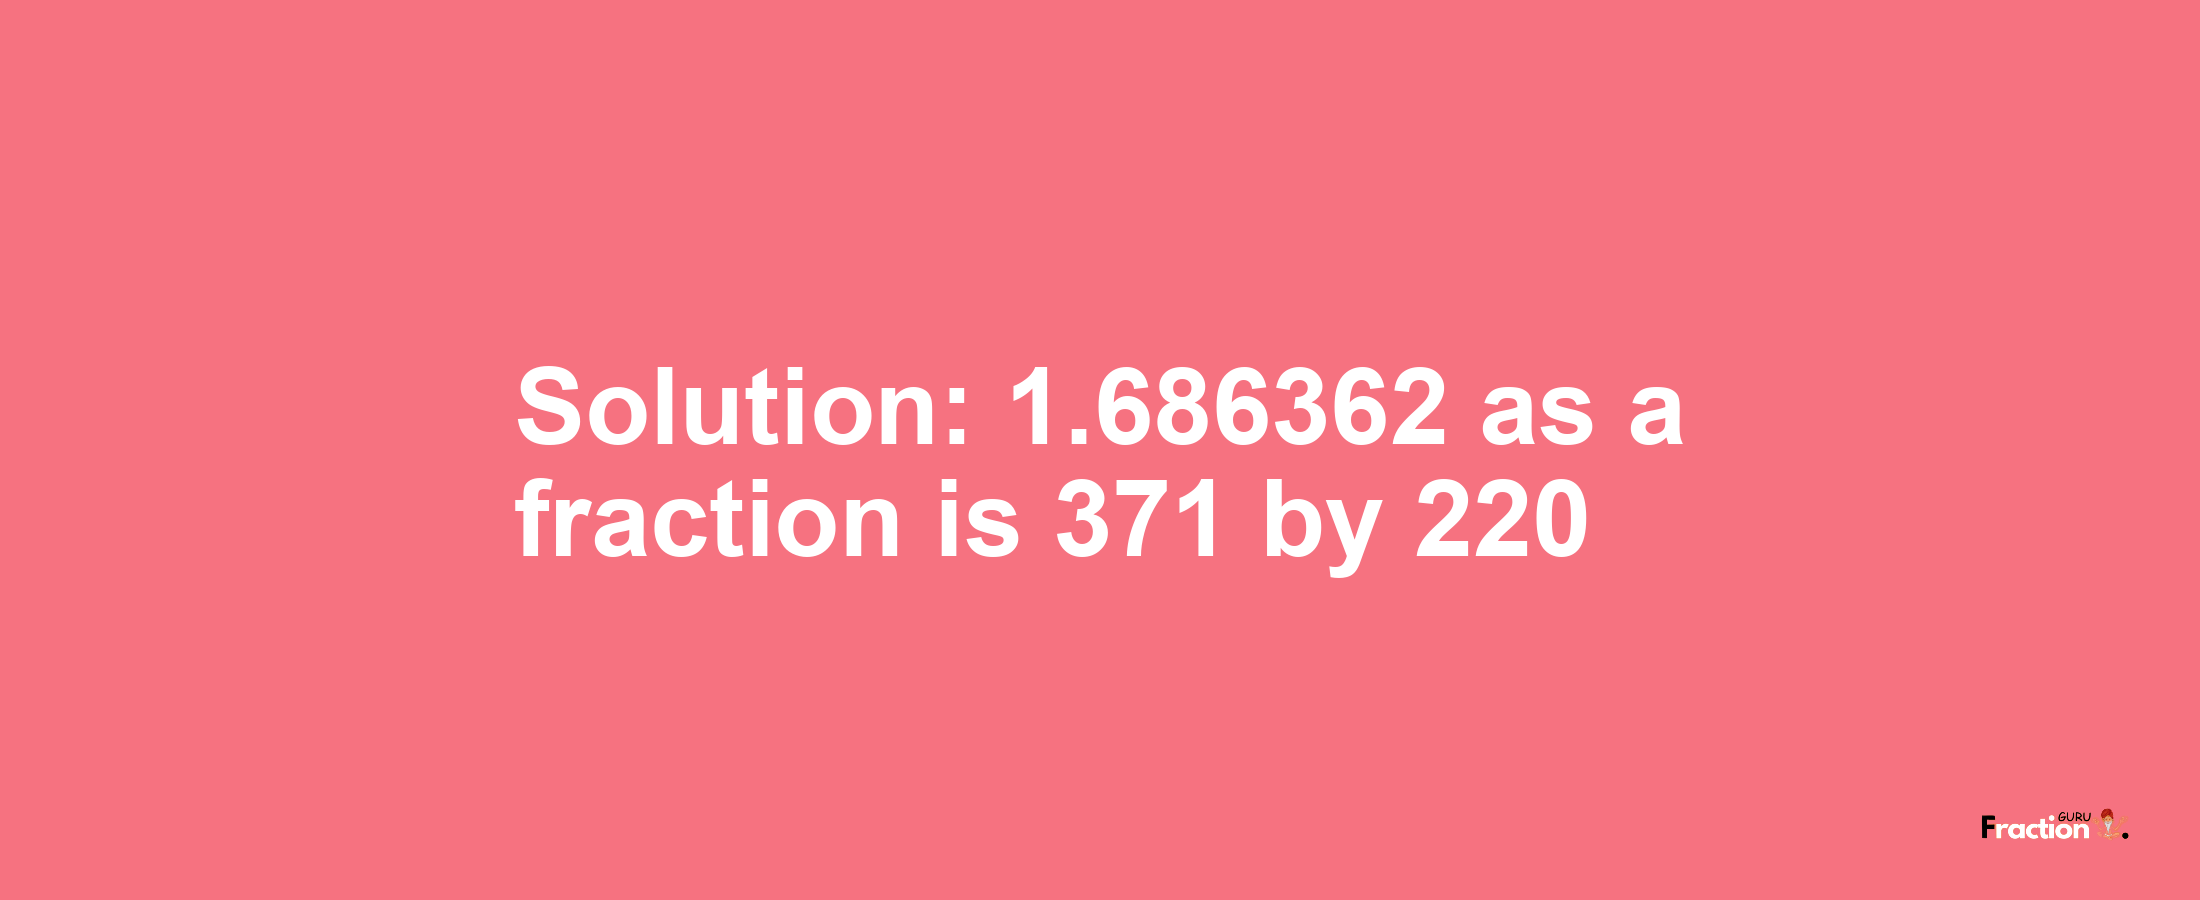 Solution:1.686362 as a fraction is 371/220